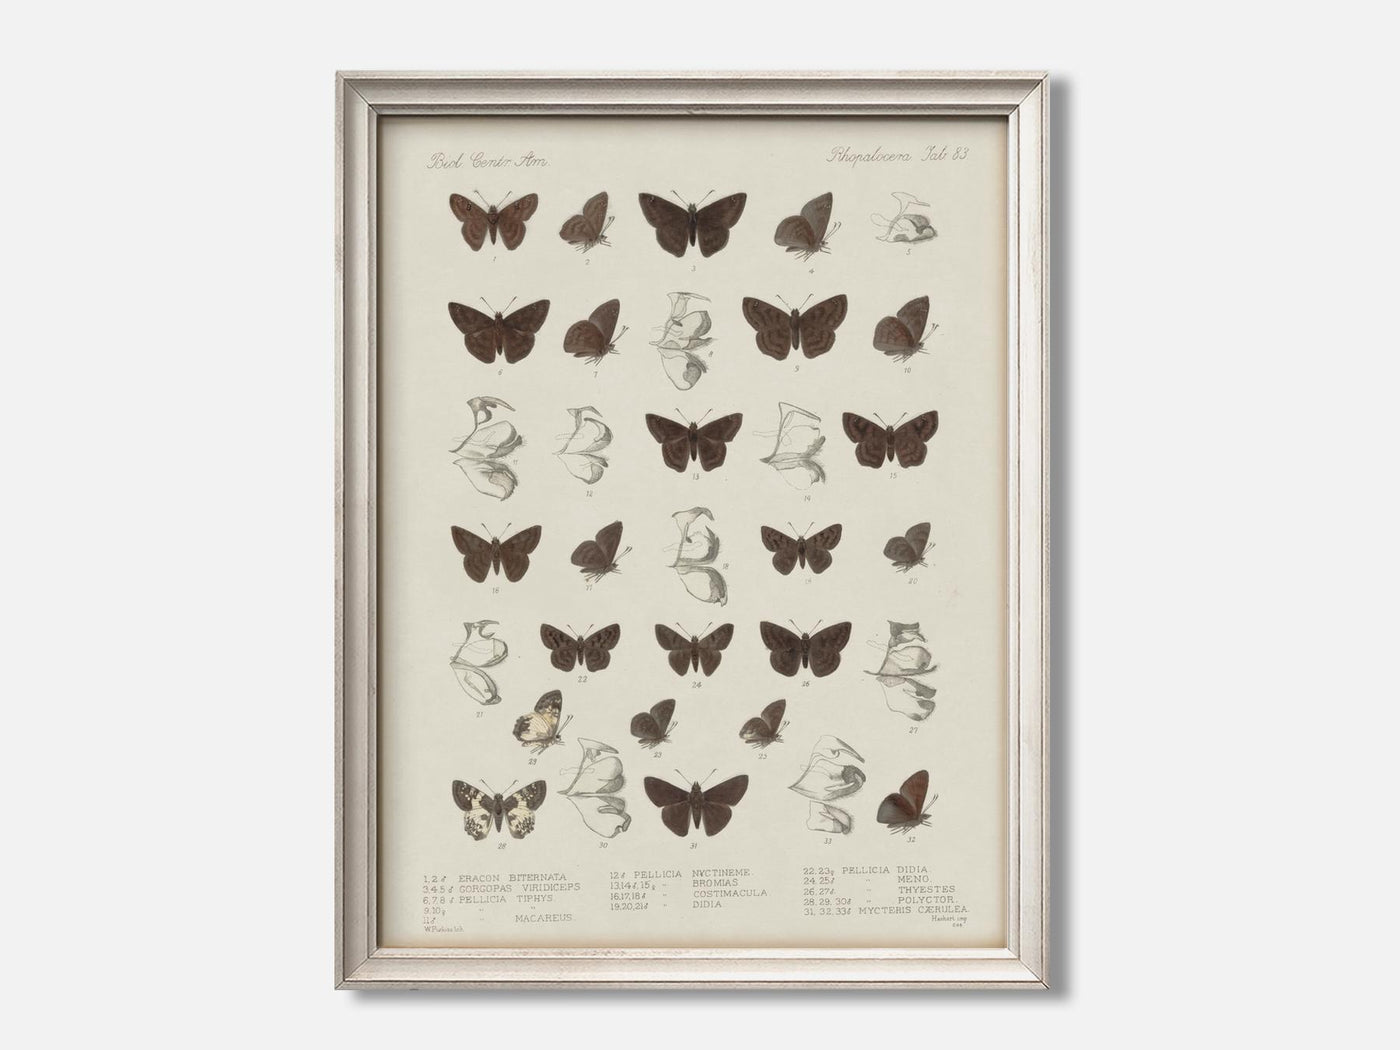 Butterflies - Insecta Lepidoptera mockup - A_ani12-V1-PC_F+O-SS_1-PS_5x7-C_lpa variant